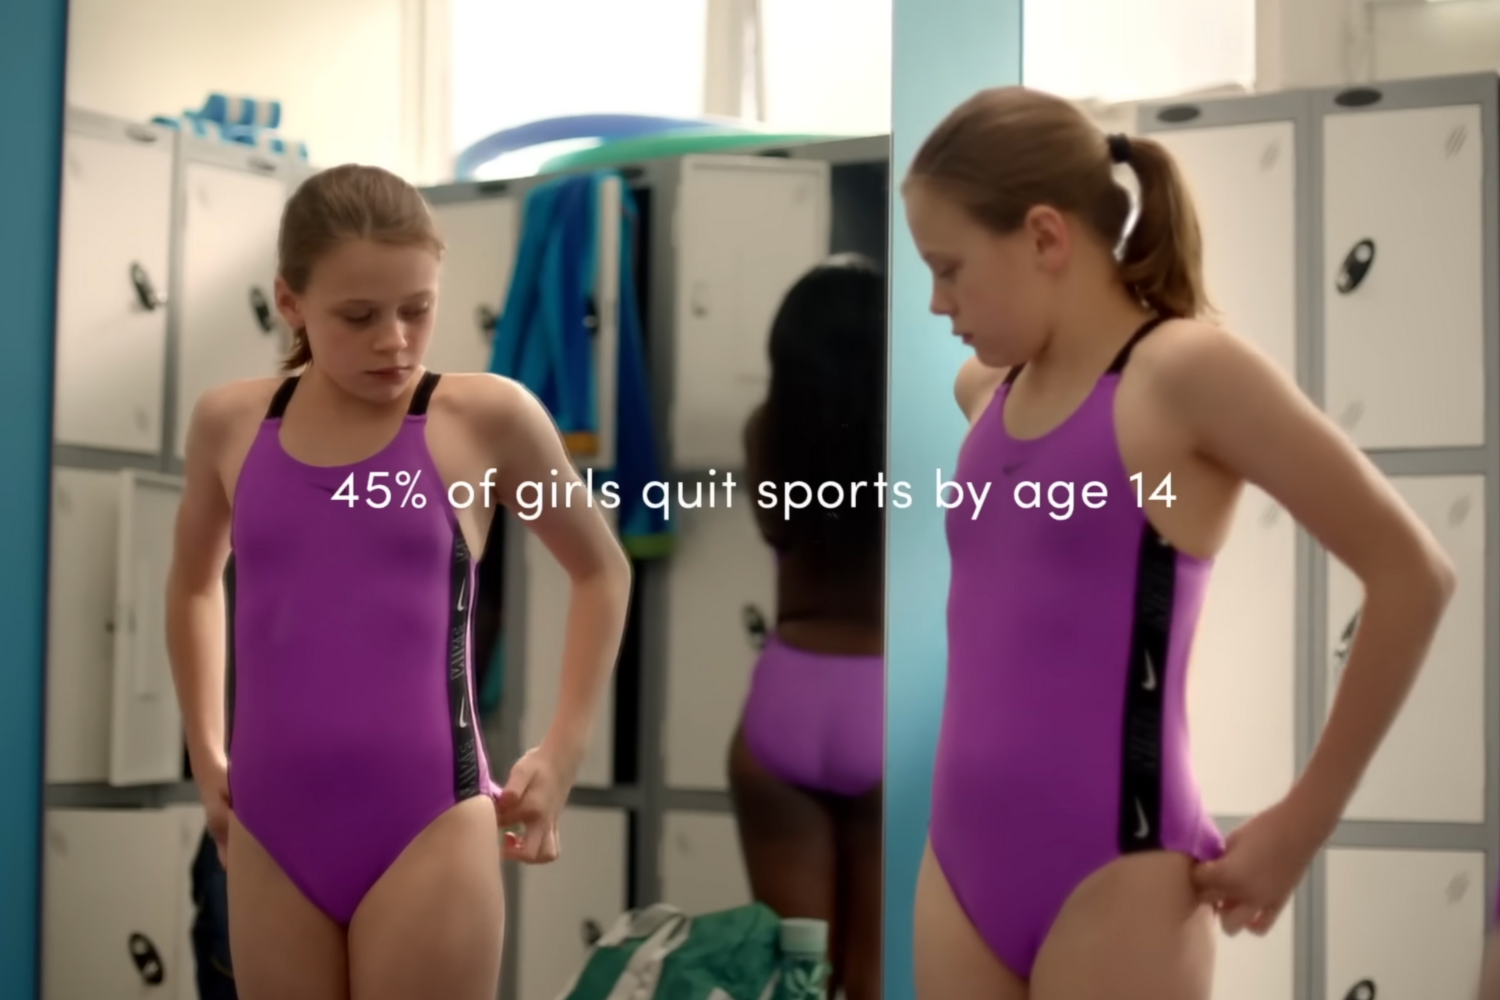 A girl in a purple bathing suit looks at herself in the mirror of a locker room overlaid with the text "45% of girls quit sports by age 14"